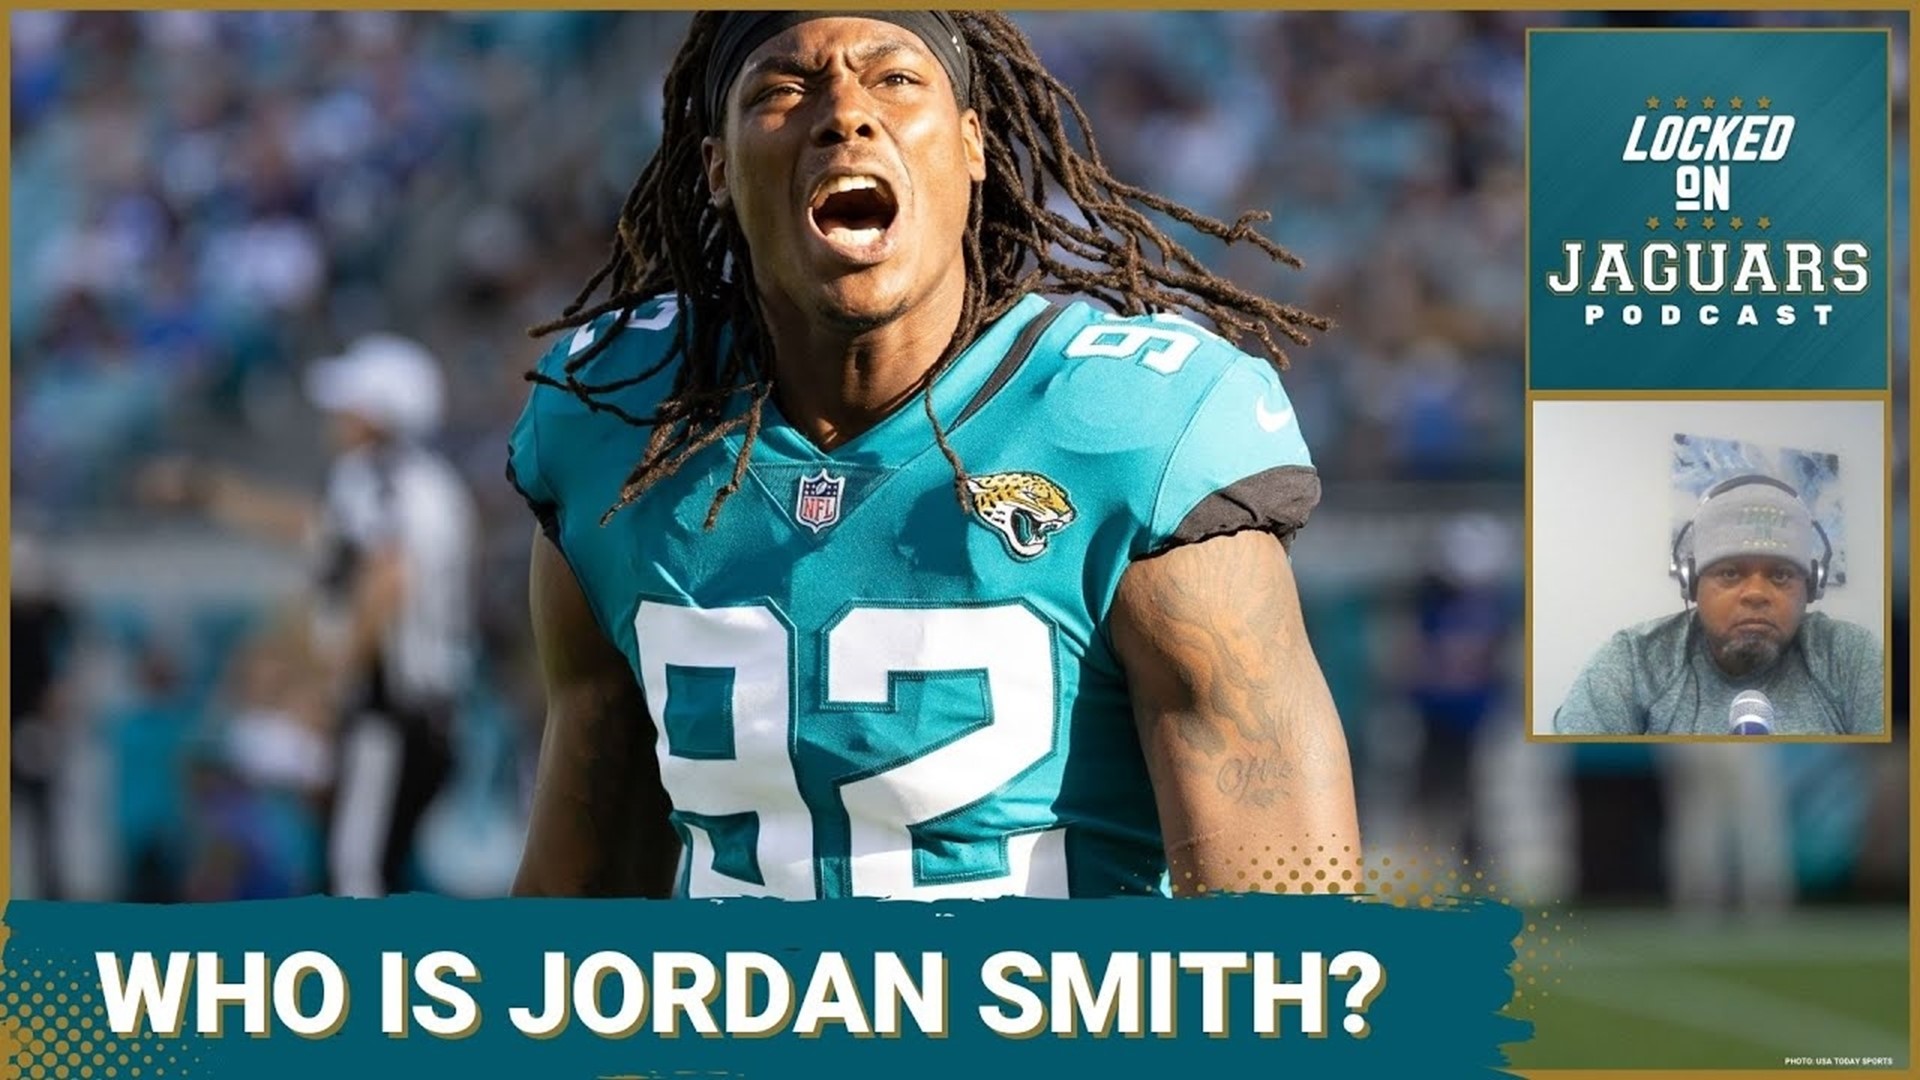 EDGE Jordan Smith is coming back from an ACL injury with the intent of making the Jacksonville Jaguars pass rush great again. Who is he? Listen up and Tony Wiggins t